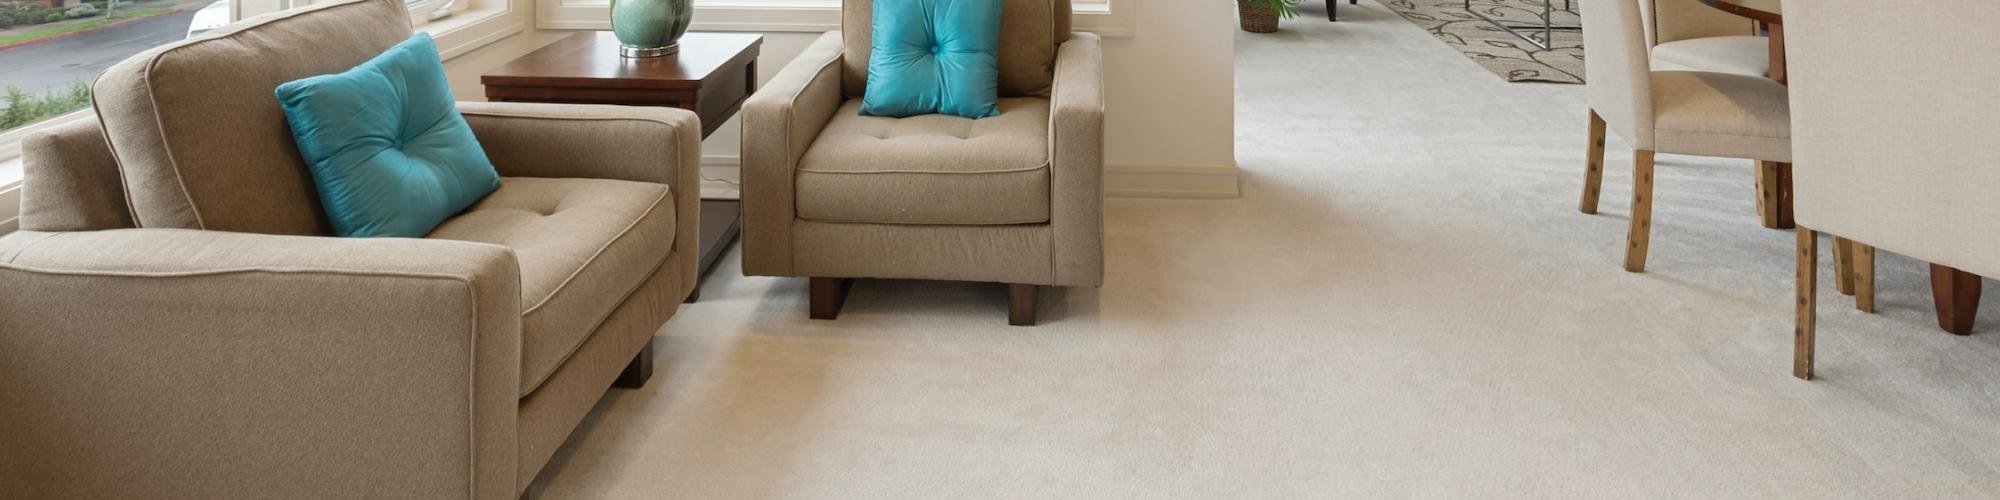 Carpet cleaning services in Myerstown PA | Martin's Floor Coverings Inc.